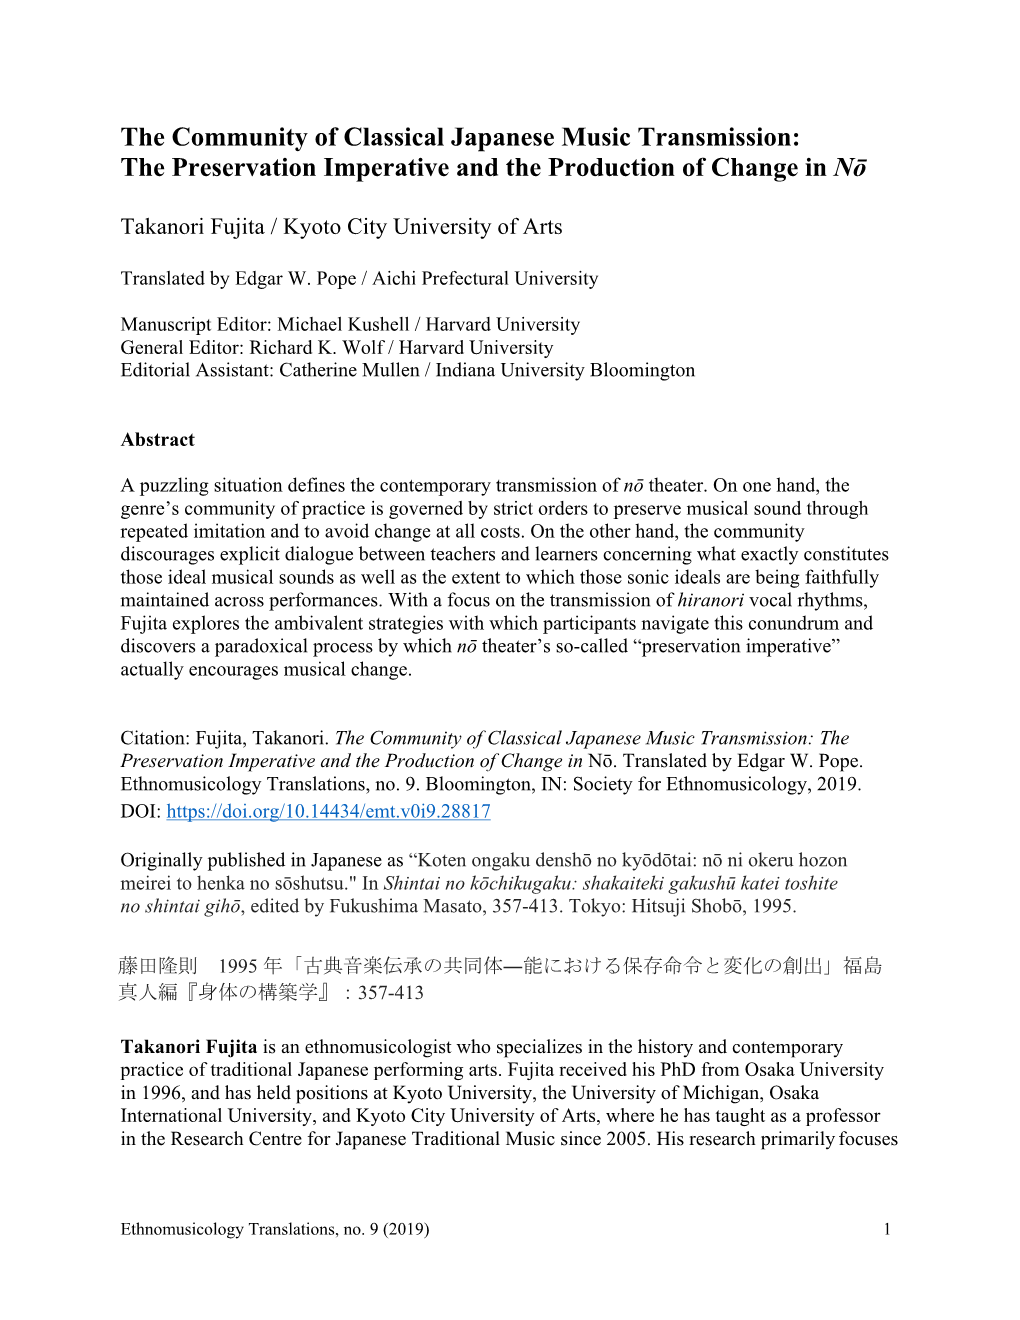 The Community of Classical Japanese Music Transmission: the Preservation Imperative and the Production of Change in Nō